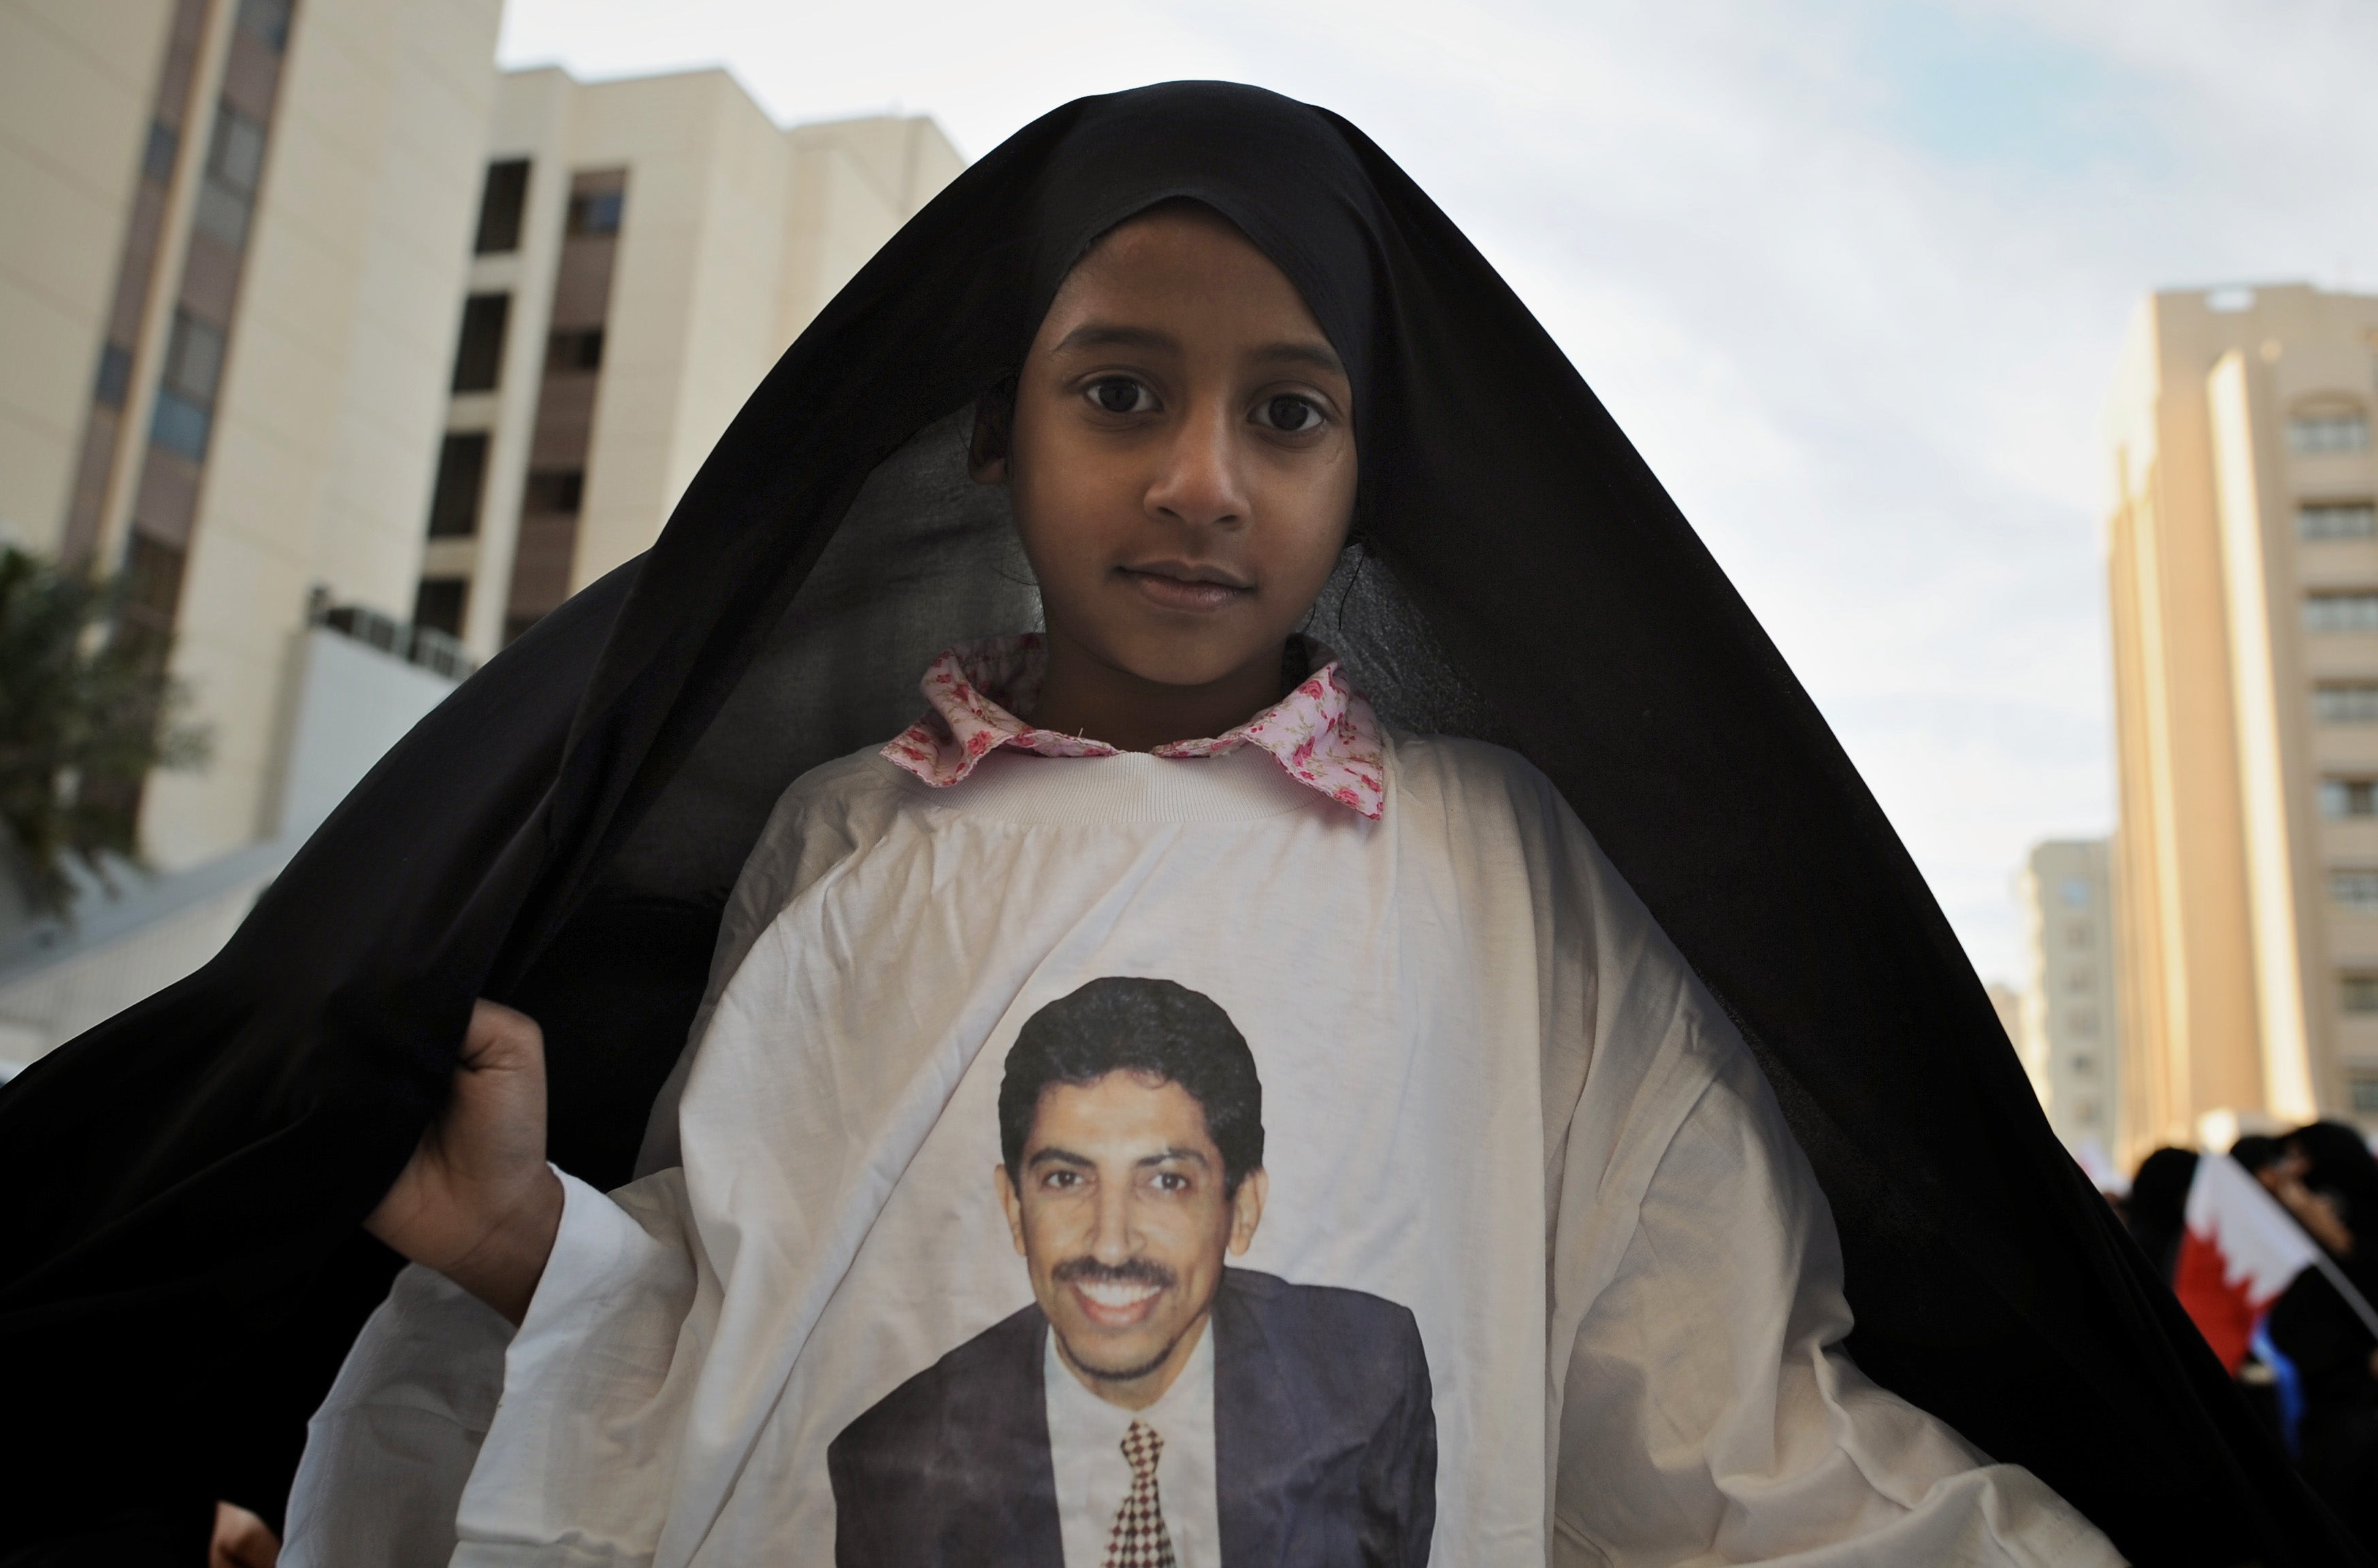 Bahraini girl wears top with image of Abdulhadi al-Khawaja, prominent Bahraini human rights activist currently serving life sentence